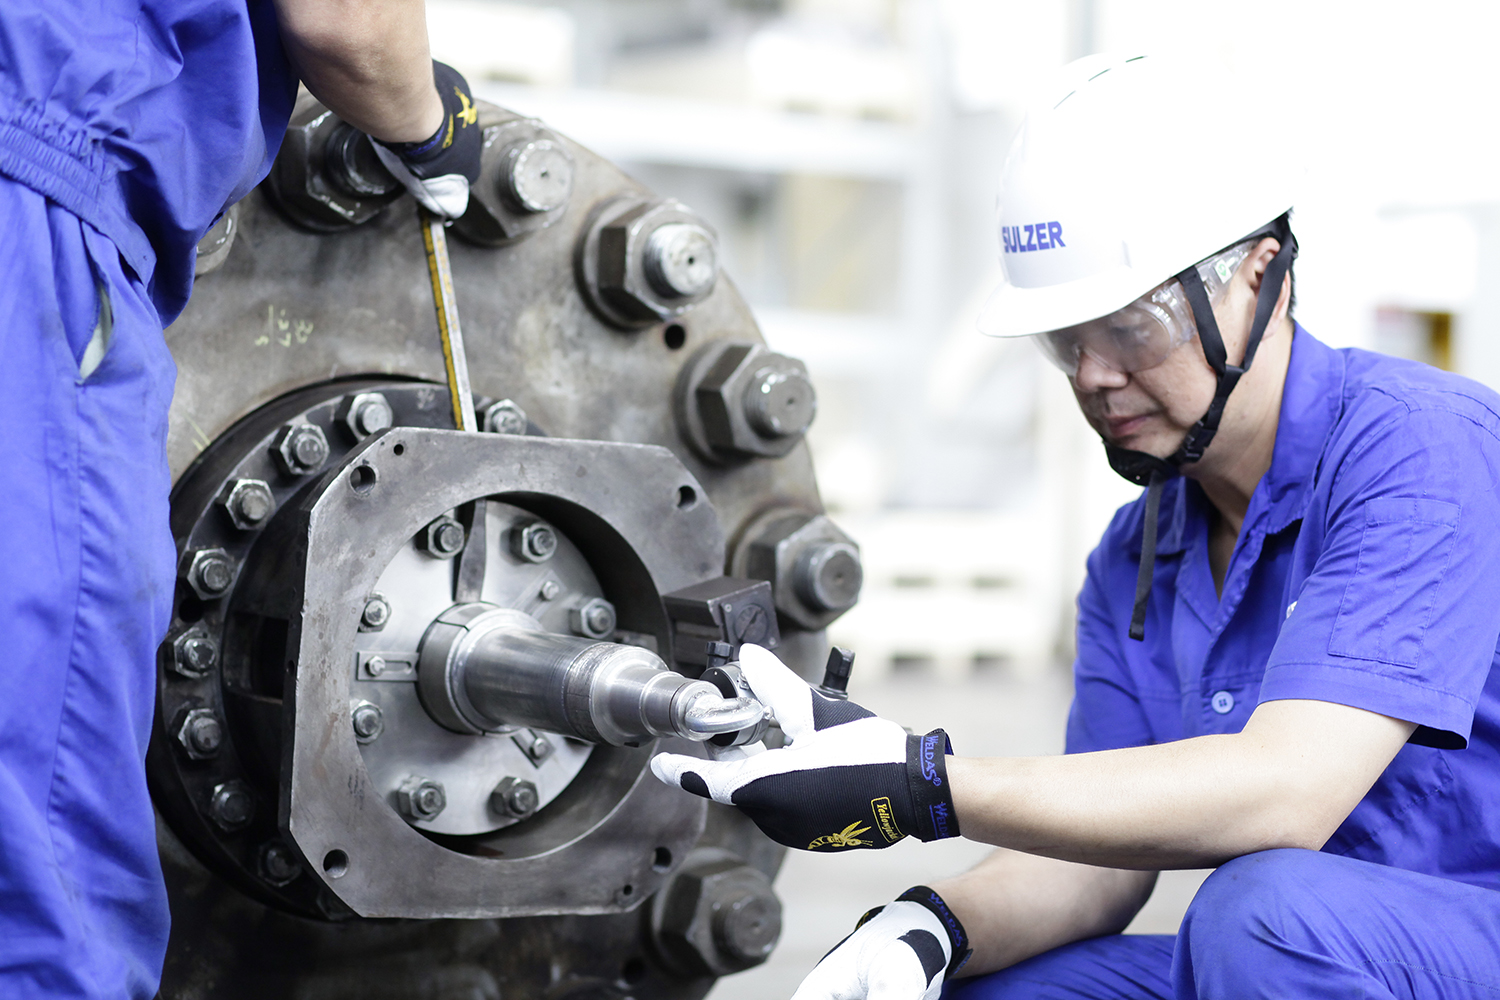 Sulzer’s innovative repair and retrofit strategies breathe new life into damaged or ageing rotating equipment, elevating it to modern operational standards.